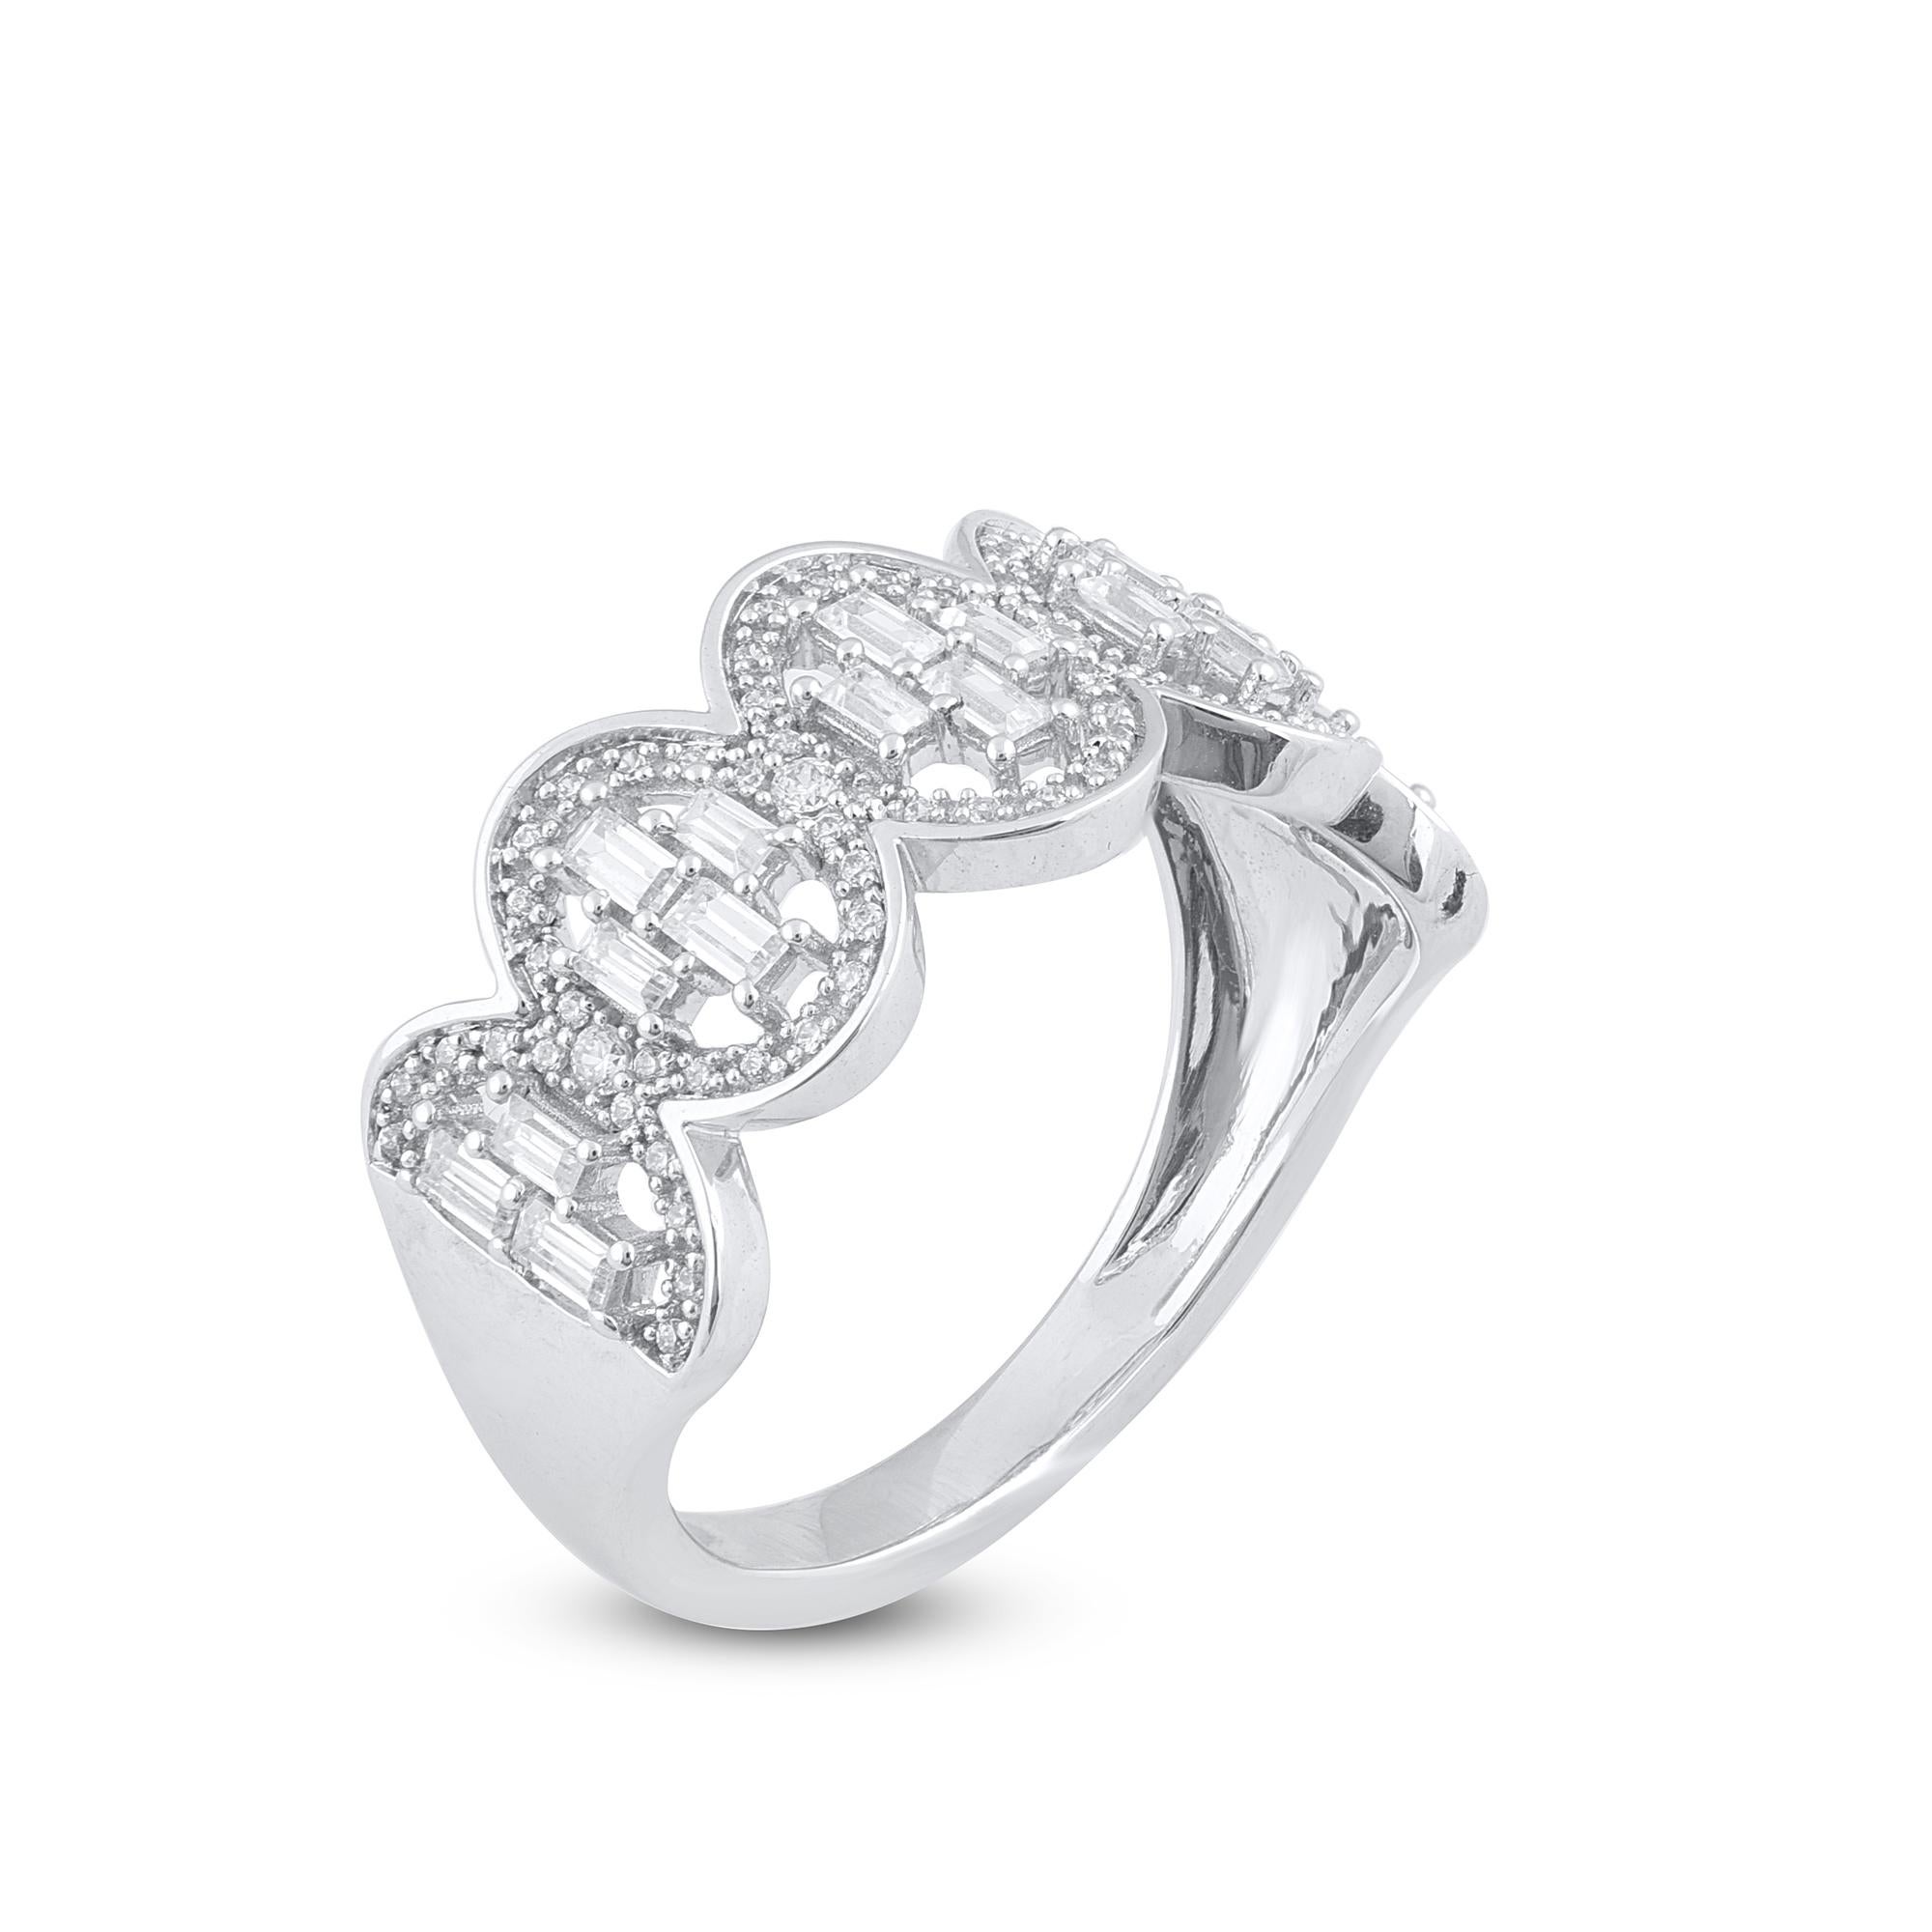 Bring charm to your look with this diamond ring. The ring is crafted from 14-karat gold in your choice of white, rose, or yellow, and features Round Brilliant 72 and Baguette - 18 white diamonds, Pave & Prongset, H-I color I2 clarity and a high